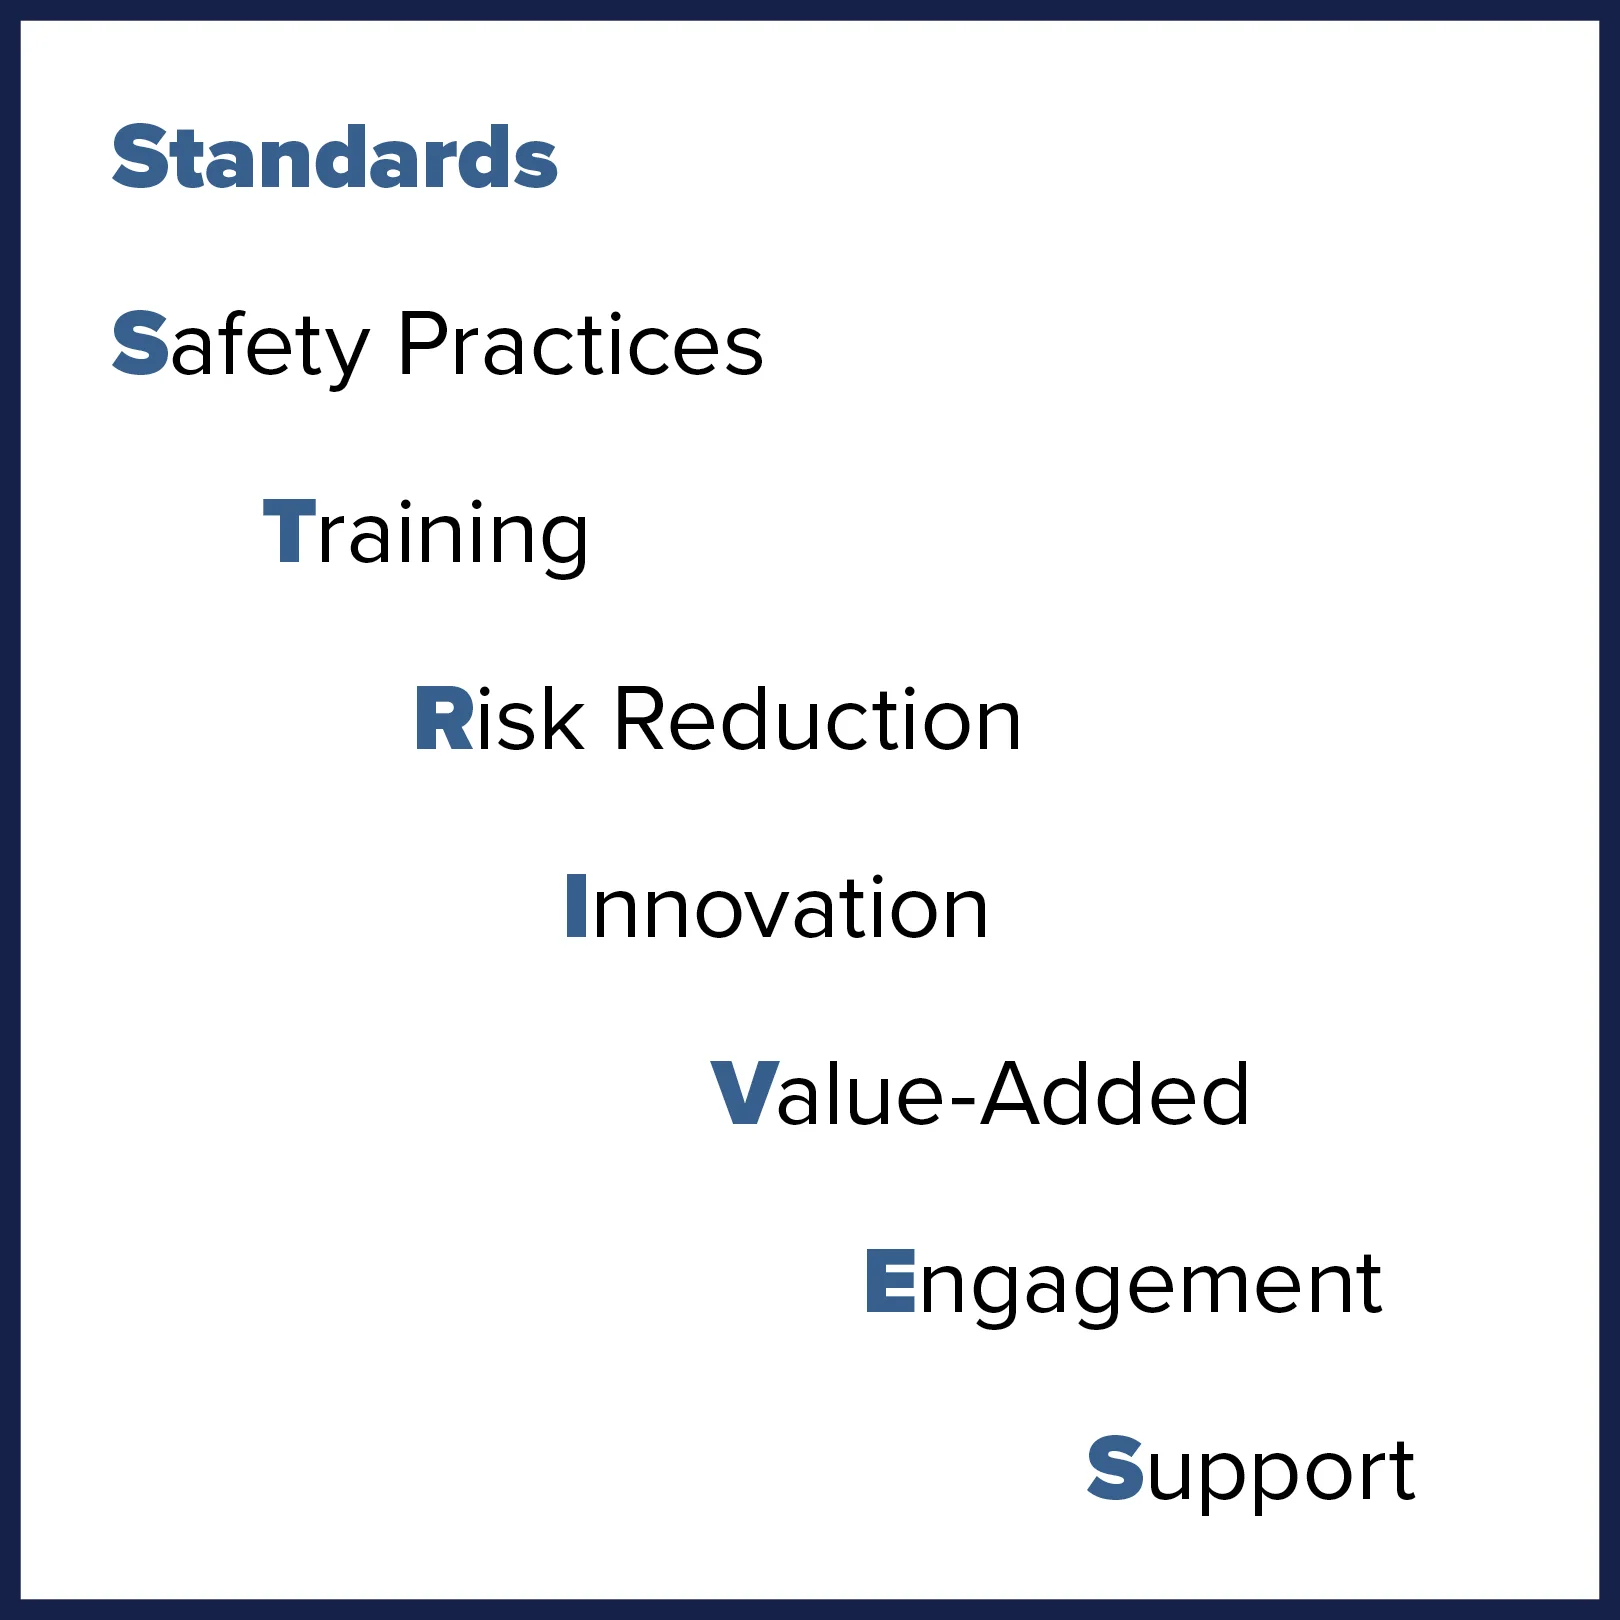 Standards: Safety, Practices, Training, Risk Reduction, Innovation, Value-Added, Engagement, Support